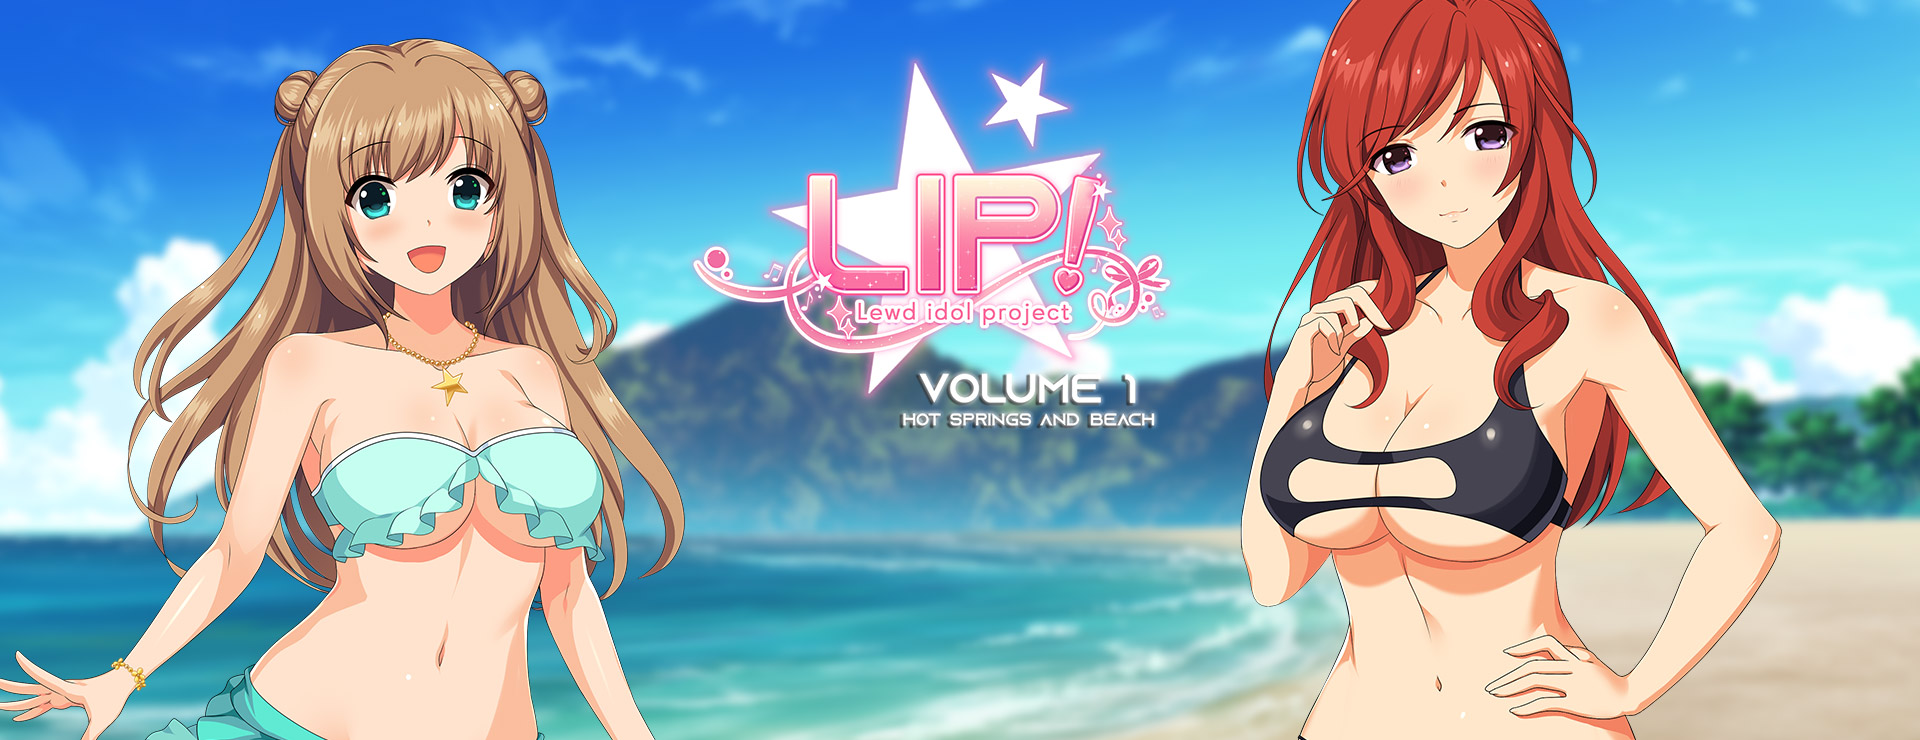 LIP! Lewd Idol Project Vol. 1 - Hot Springs and Beach Episodes - Visual Novel Game